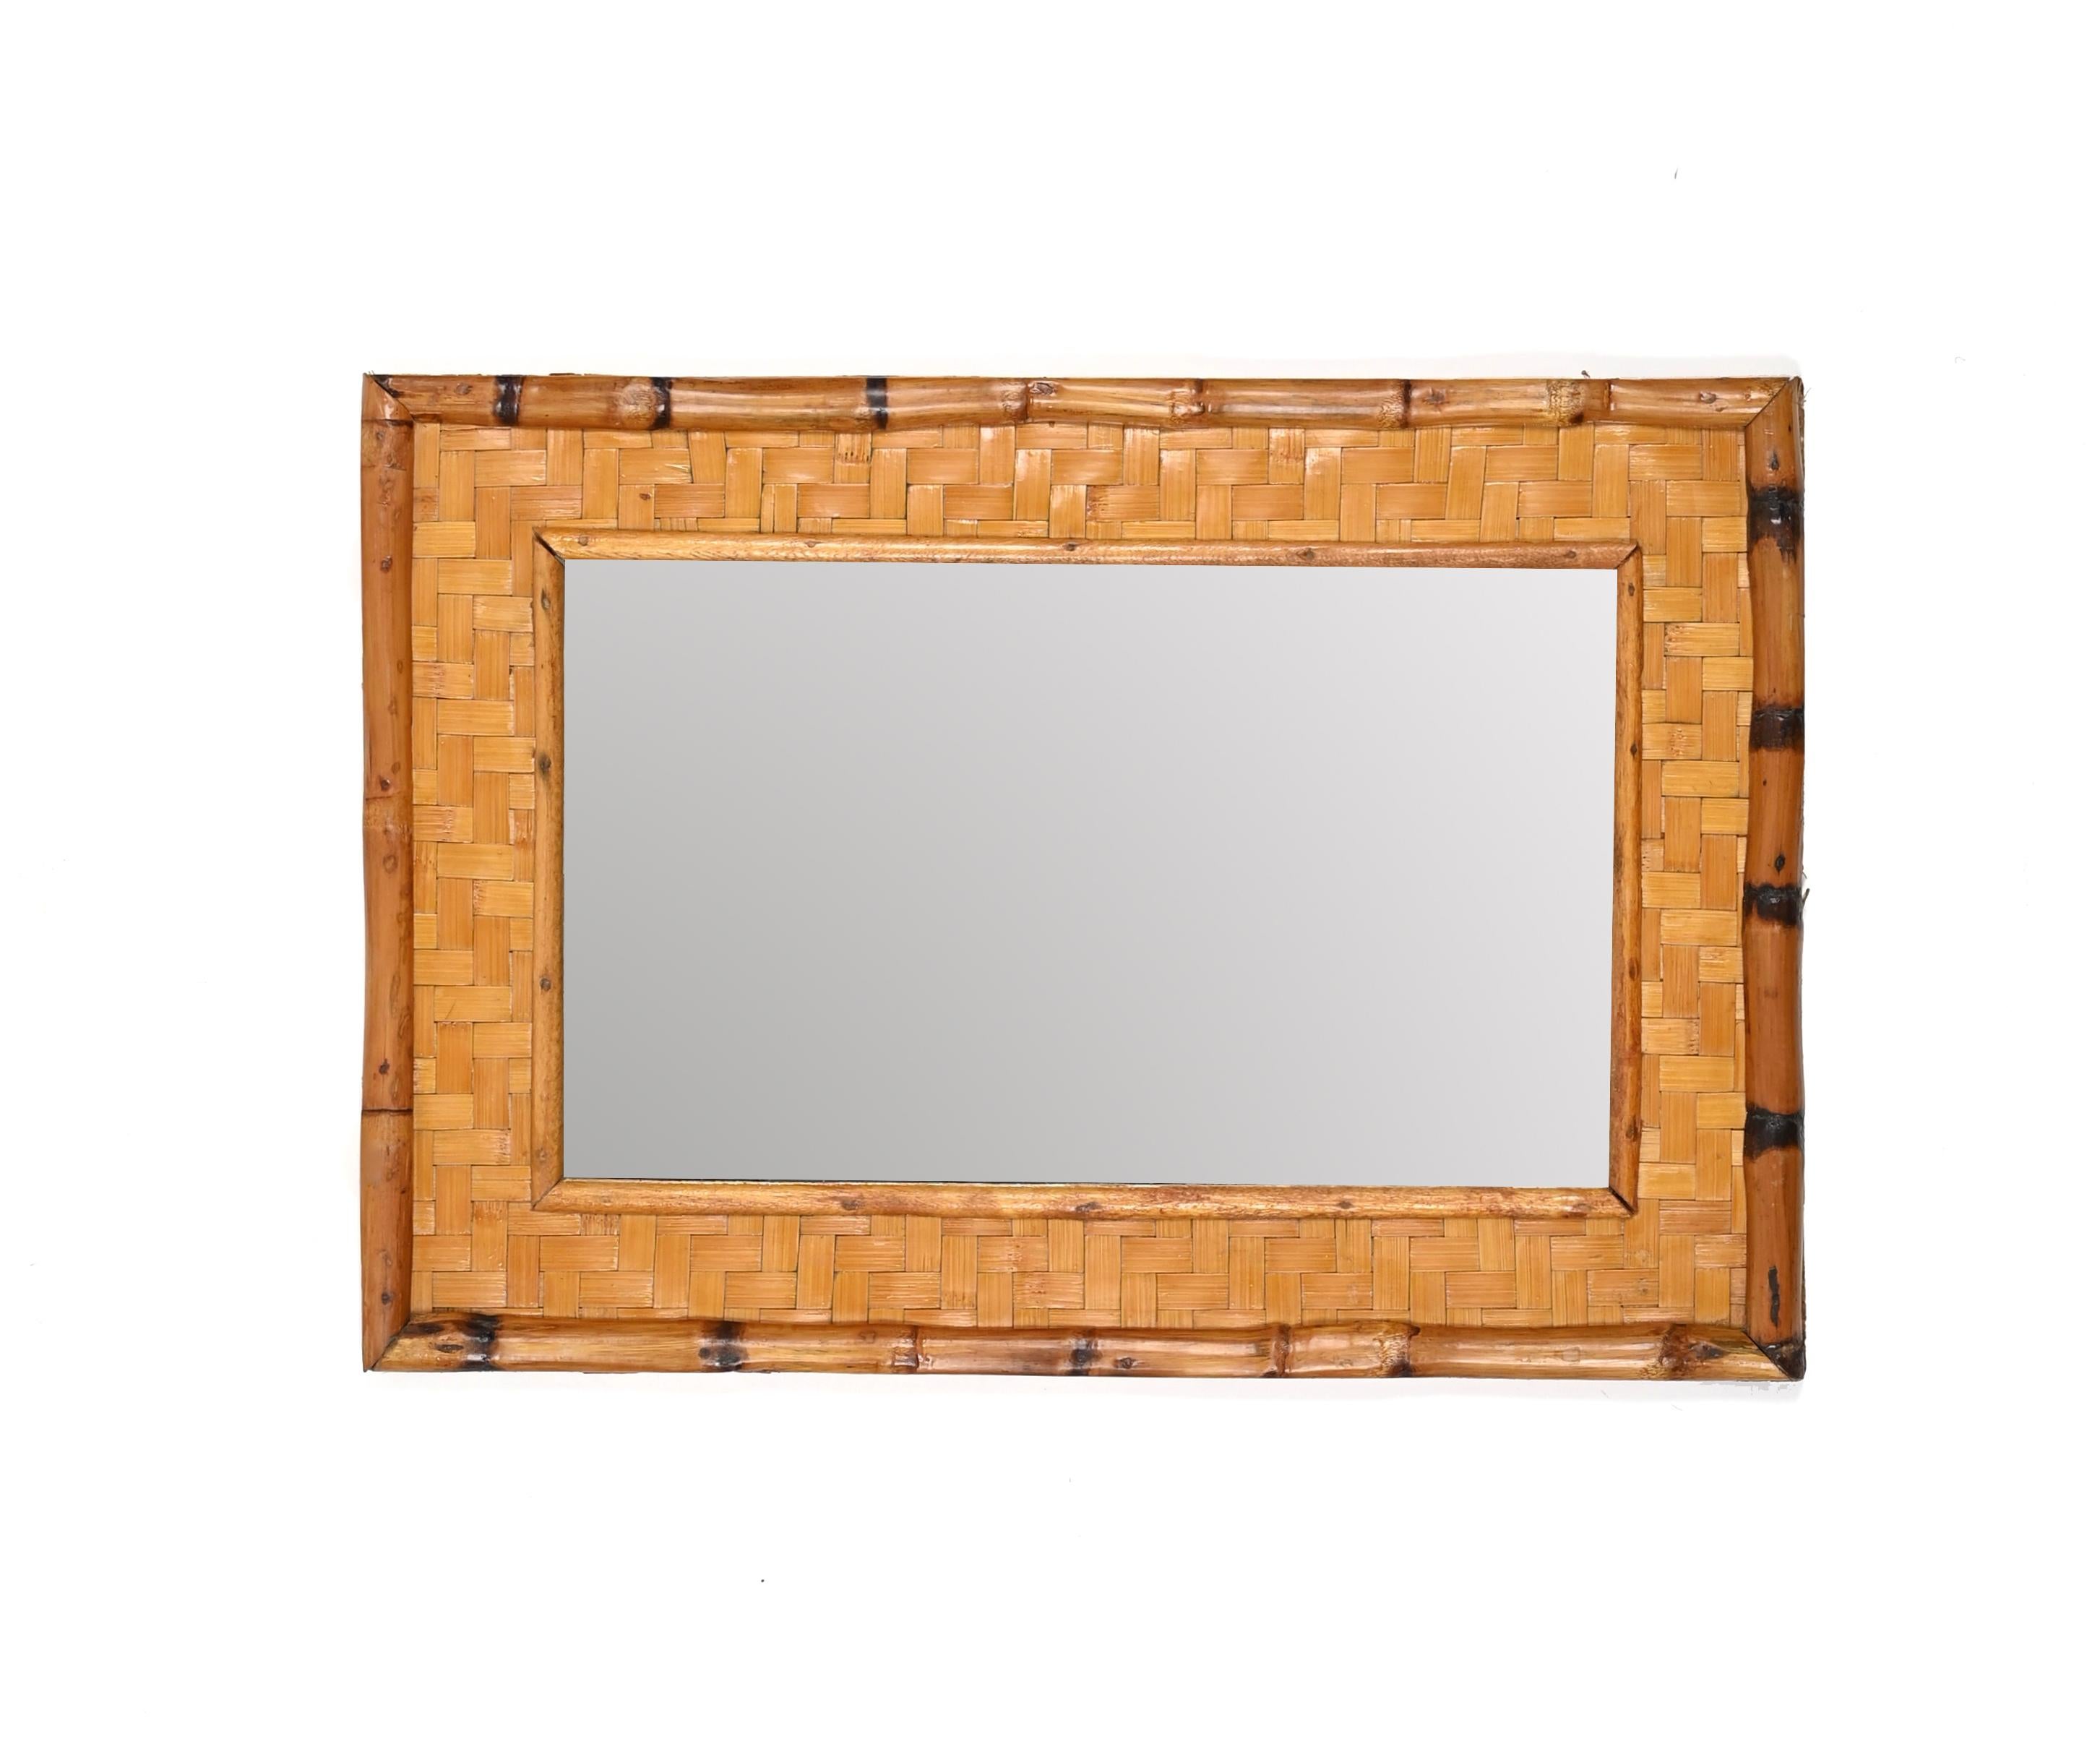 Hand-Crafted Mid-Century Rectangular Bamboo Cane and Woven Rattan Italian Mirror, 1960s For Sale